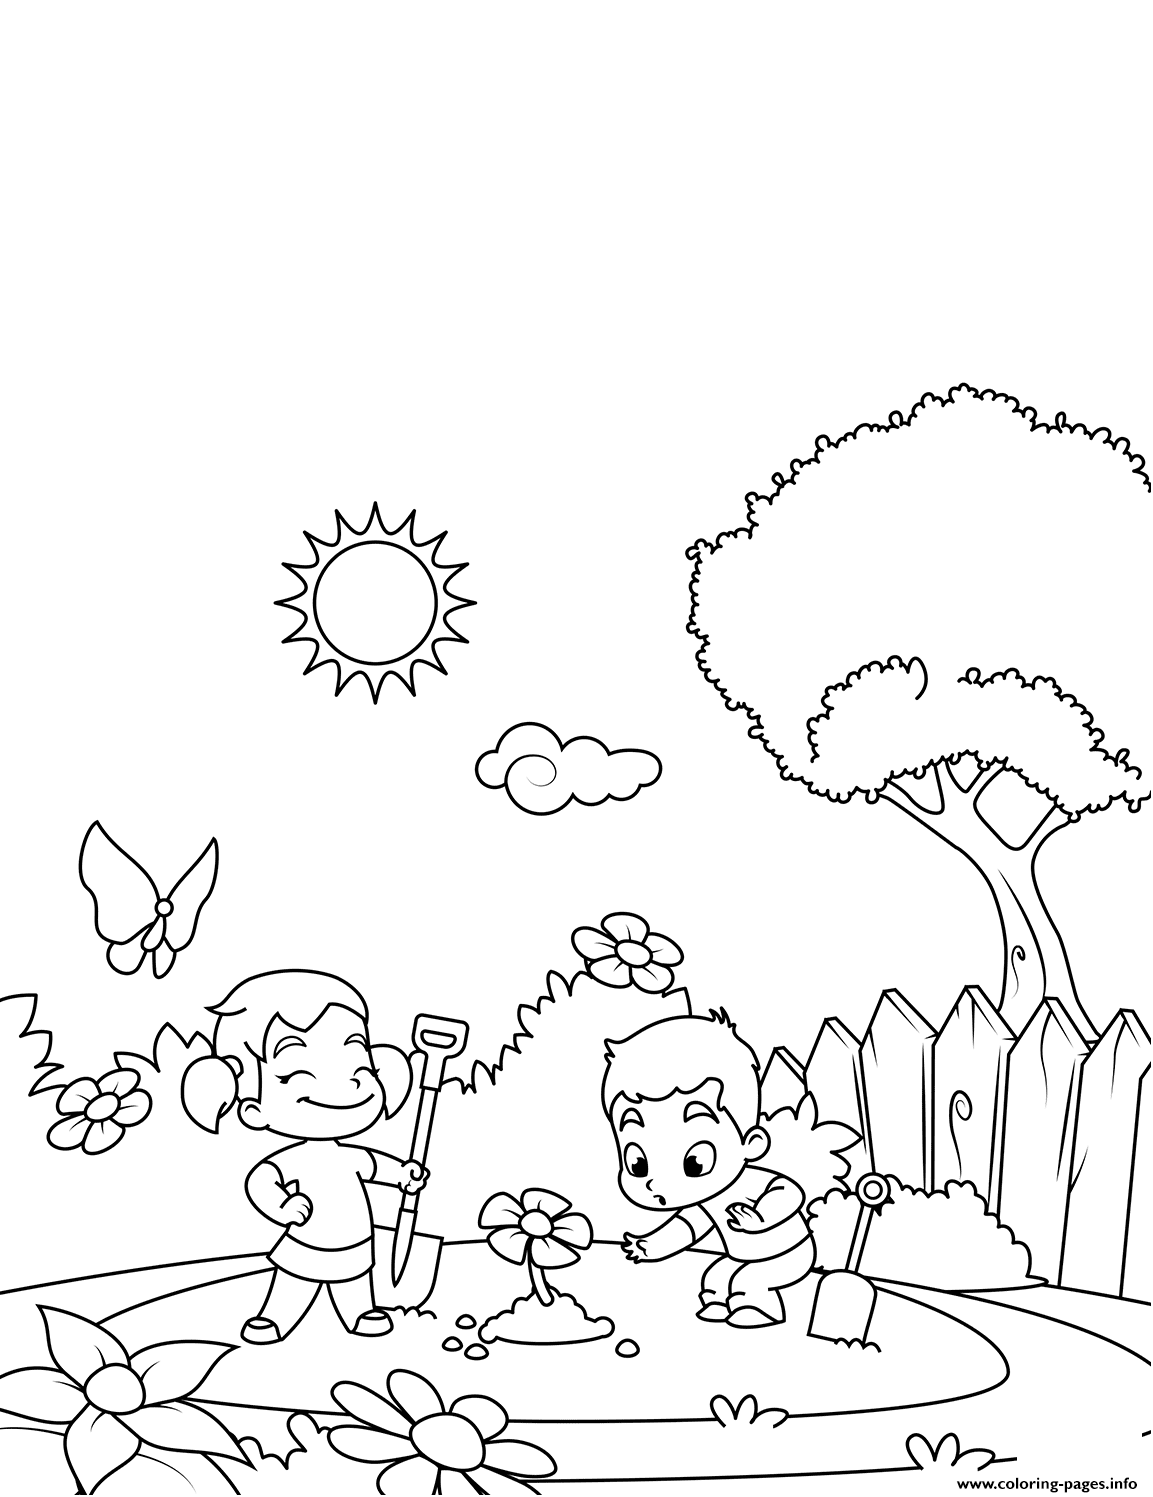 Boy And Girl Plant Flowers coloring